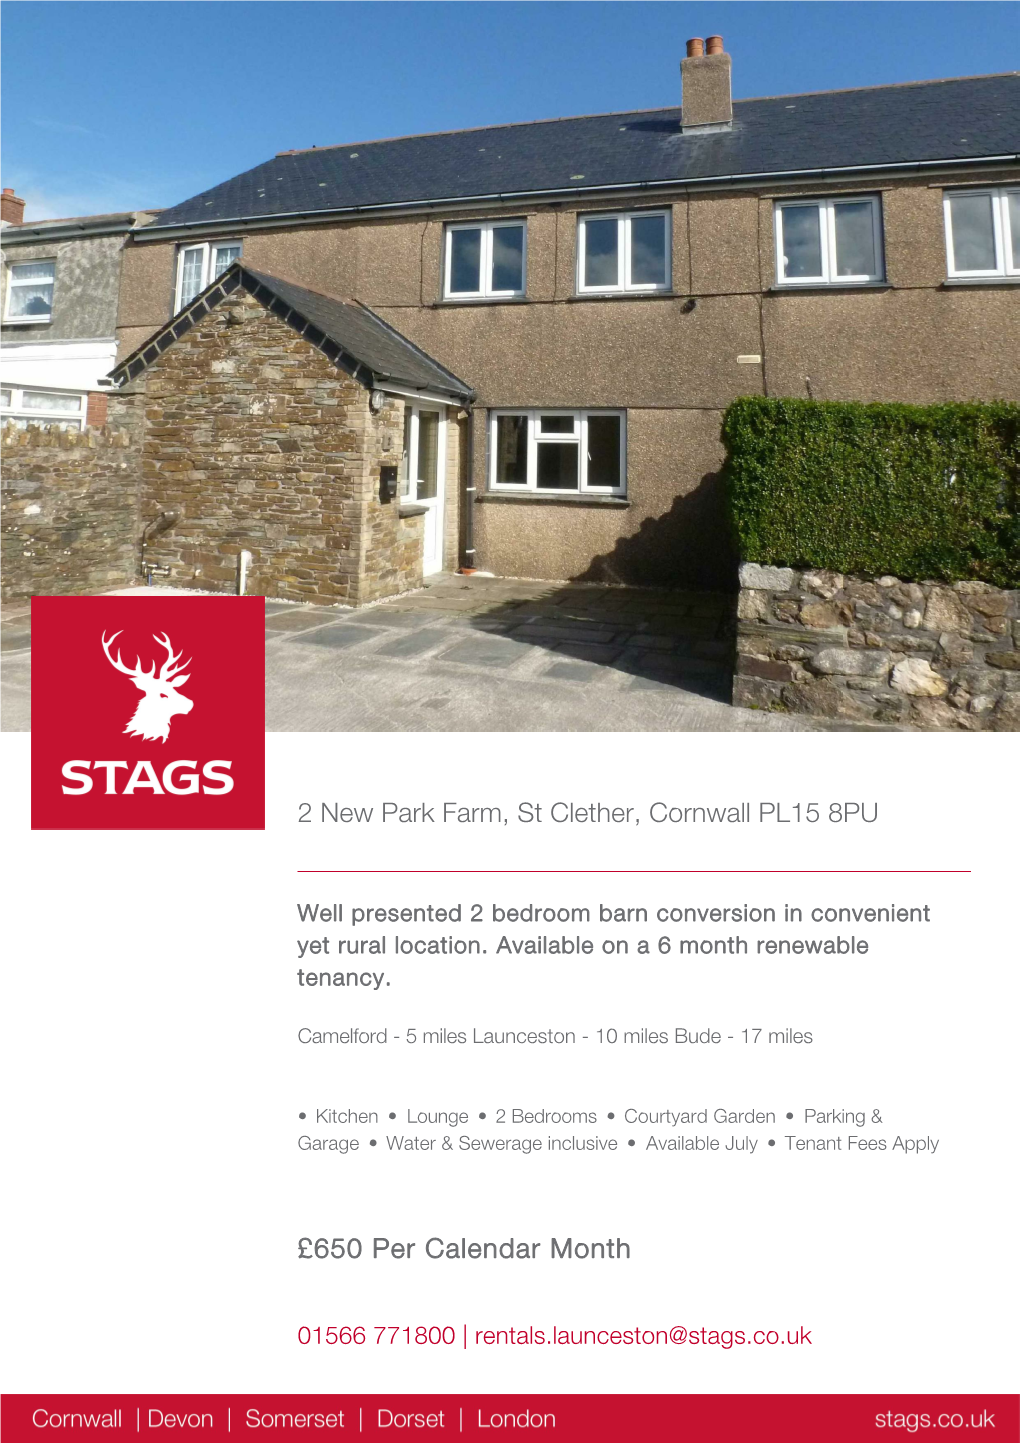 2 New Park Farm, St Clether, Cornwall PL15 8PU